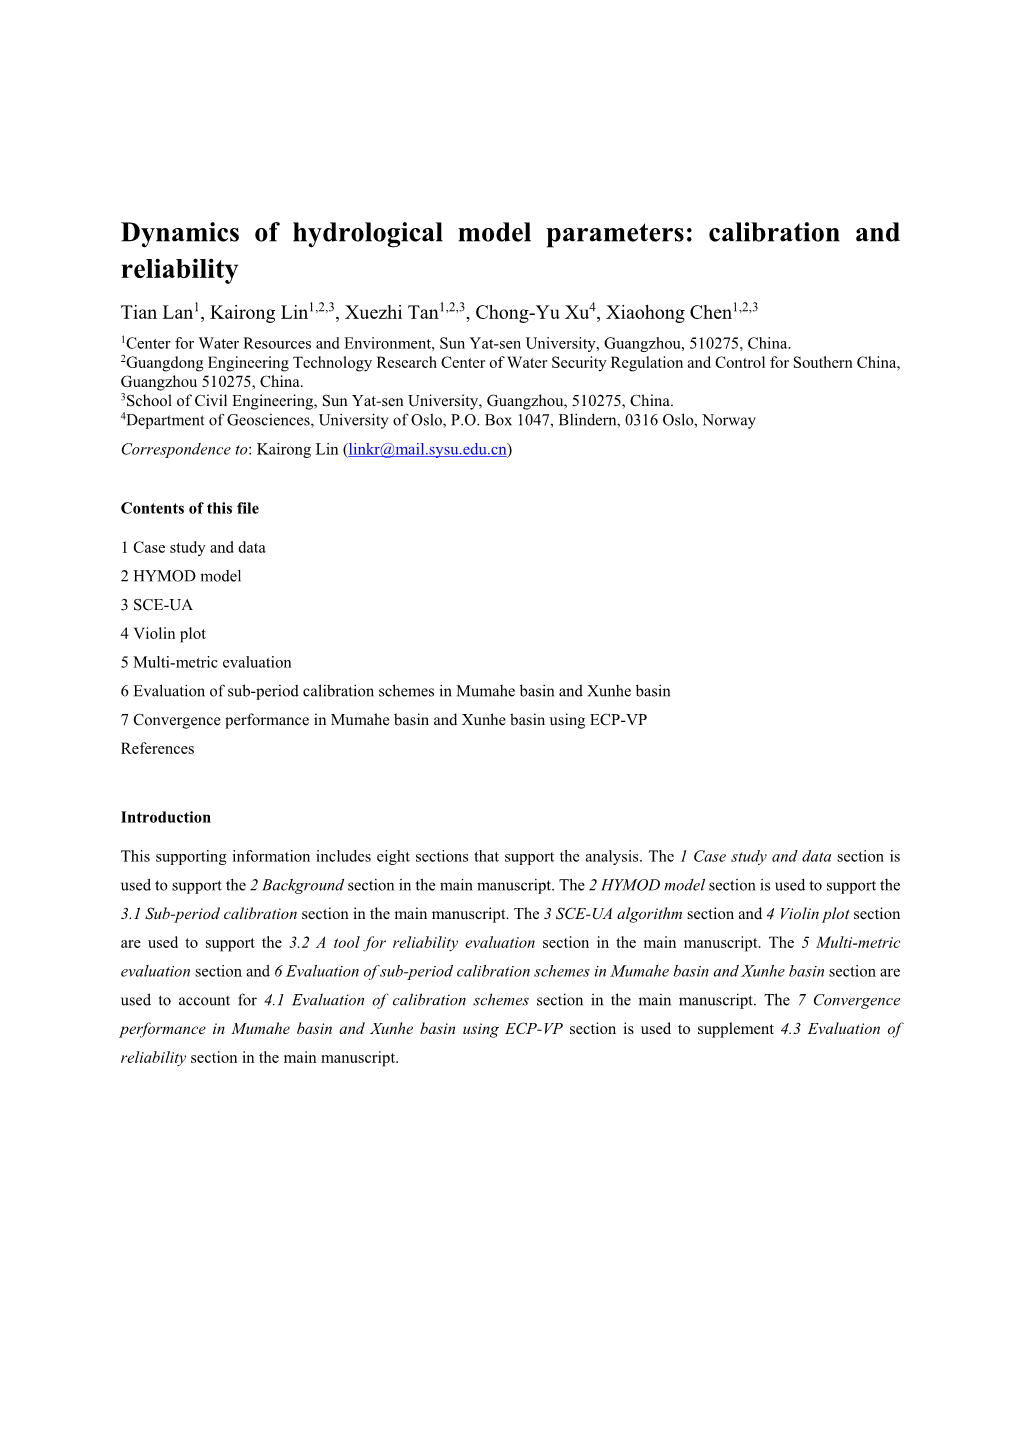 Dynamics of Hydrological Model Parameters: Calibration and Reliability